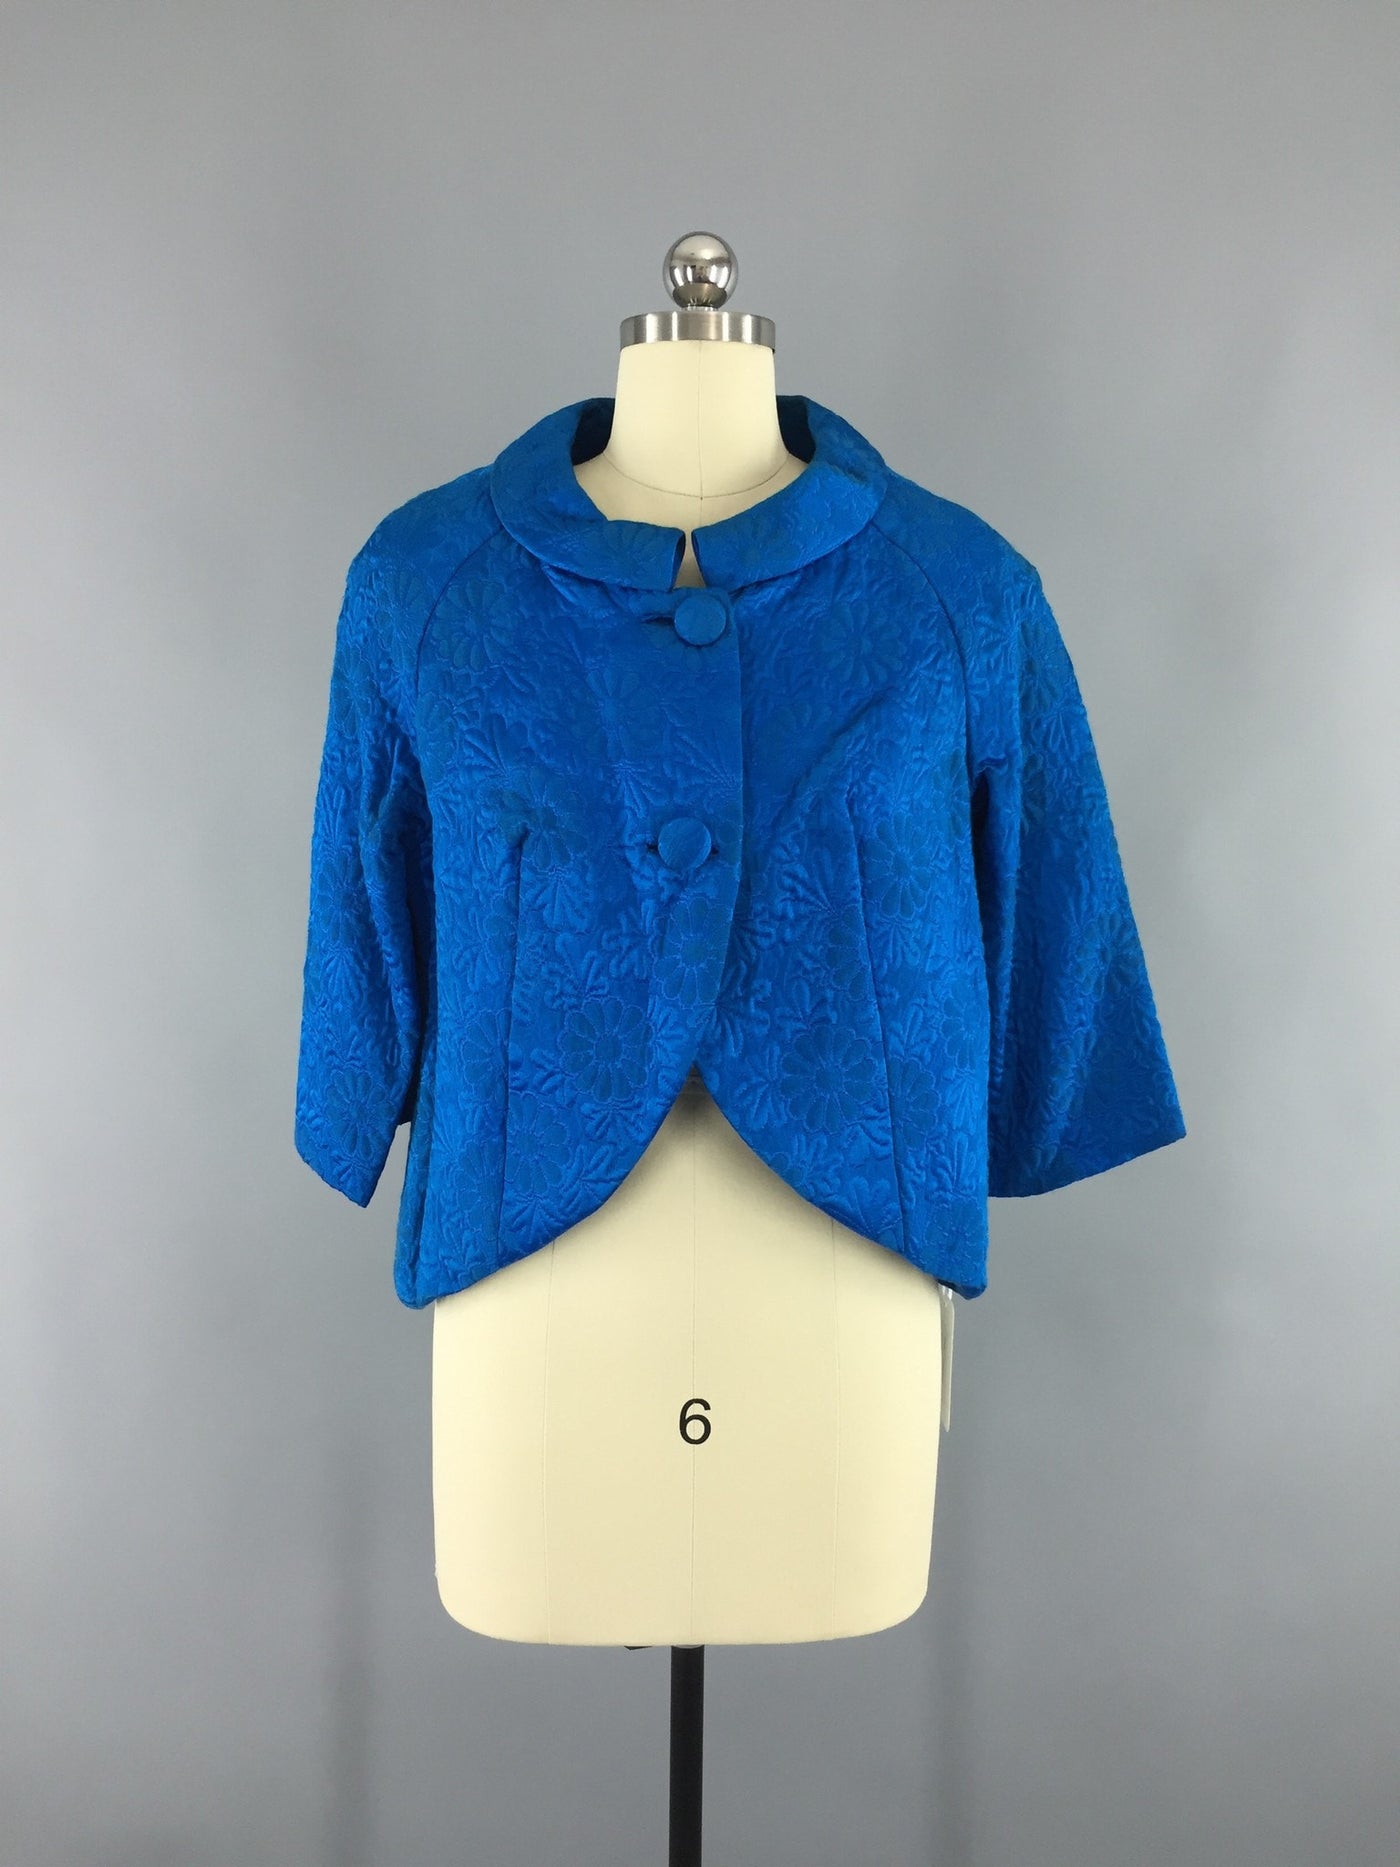 Vintage 1960s Electric Blue Dress and Jacket Set - ThisBlueBird